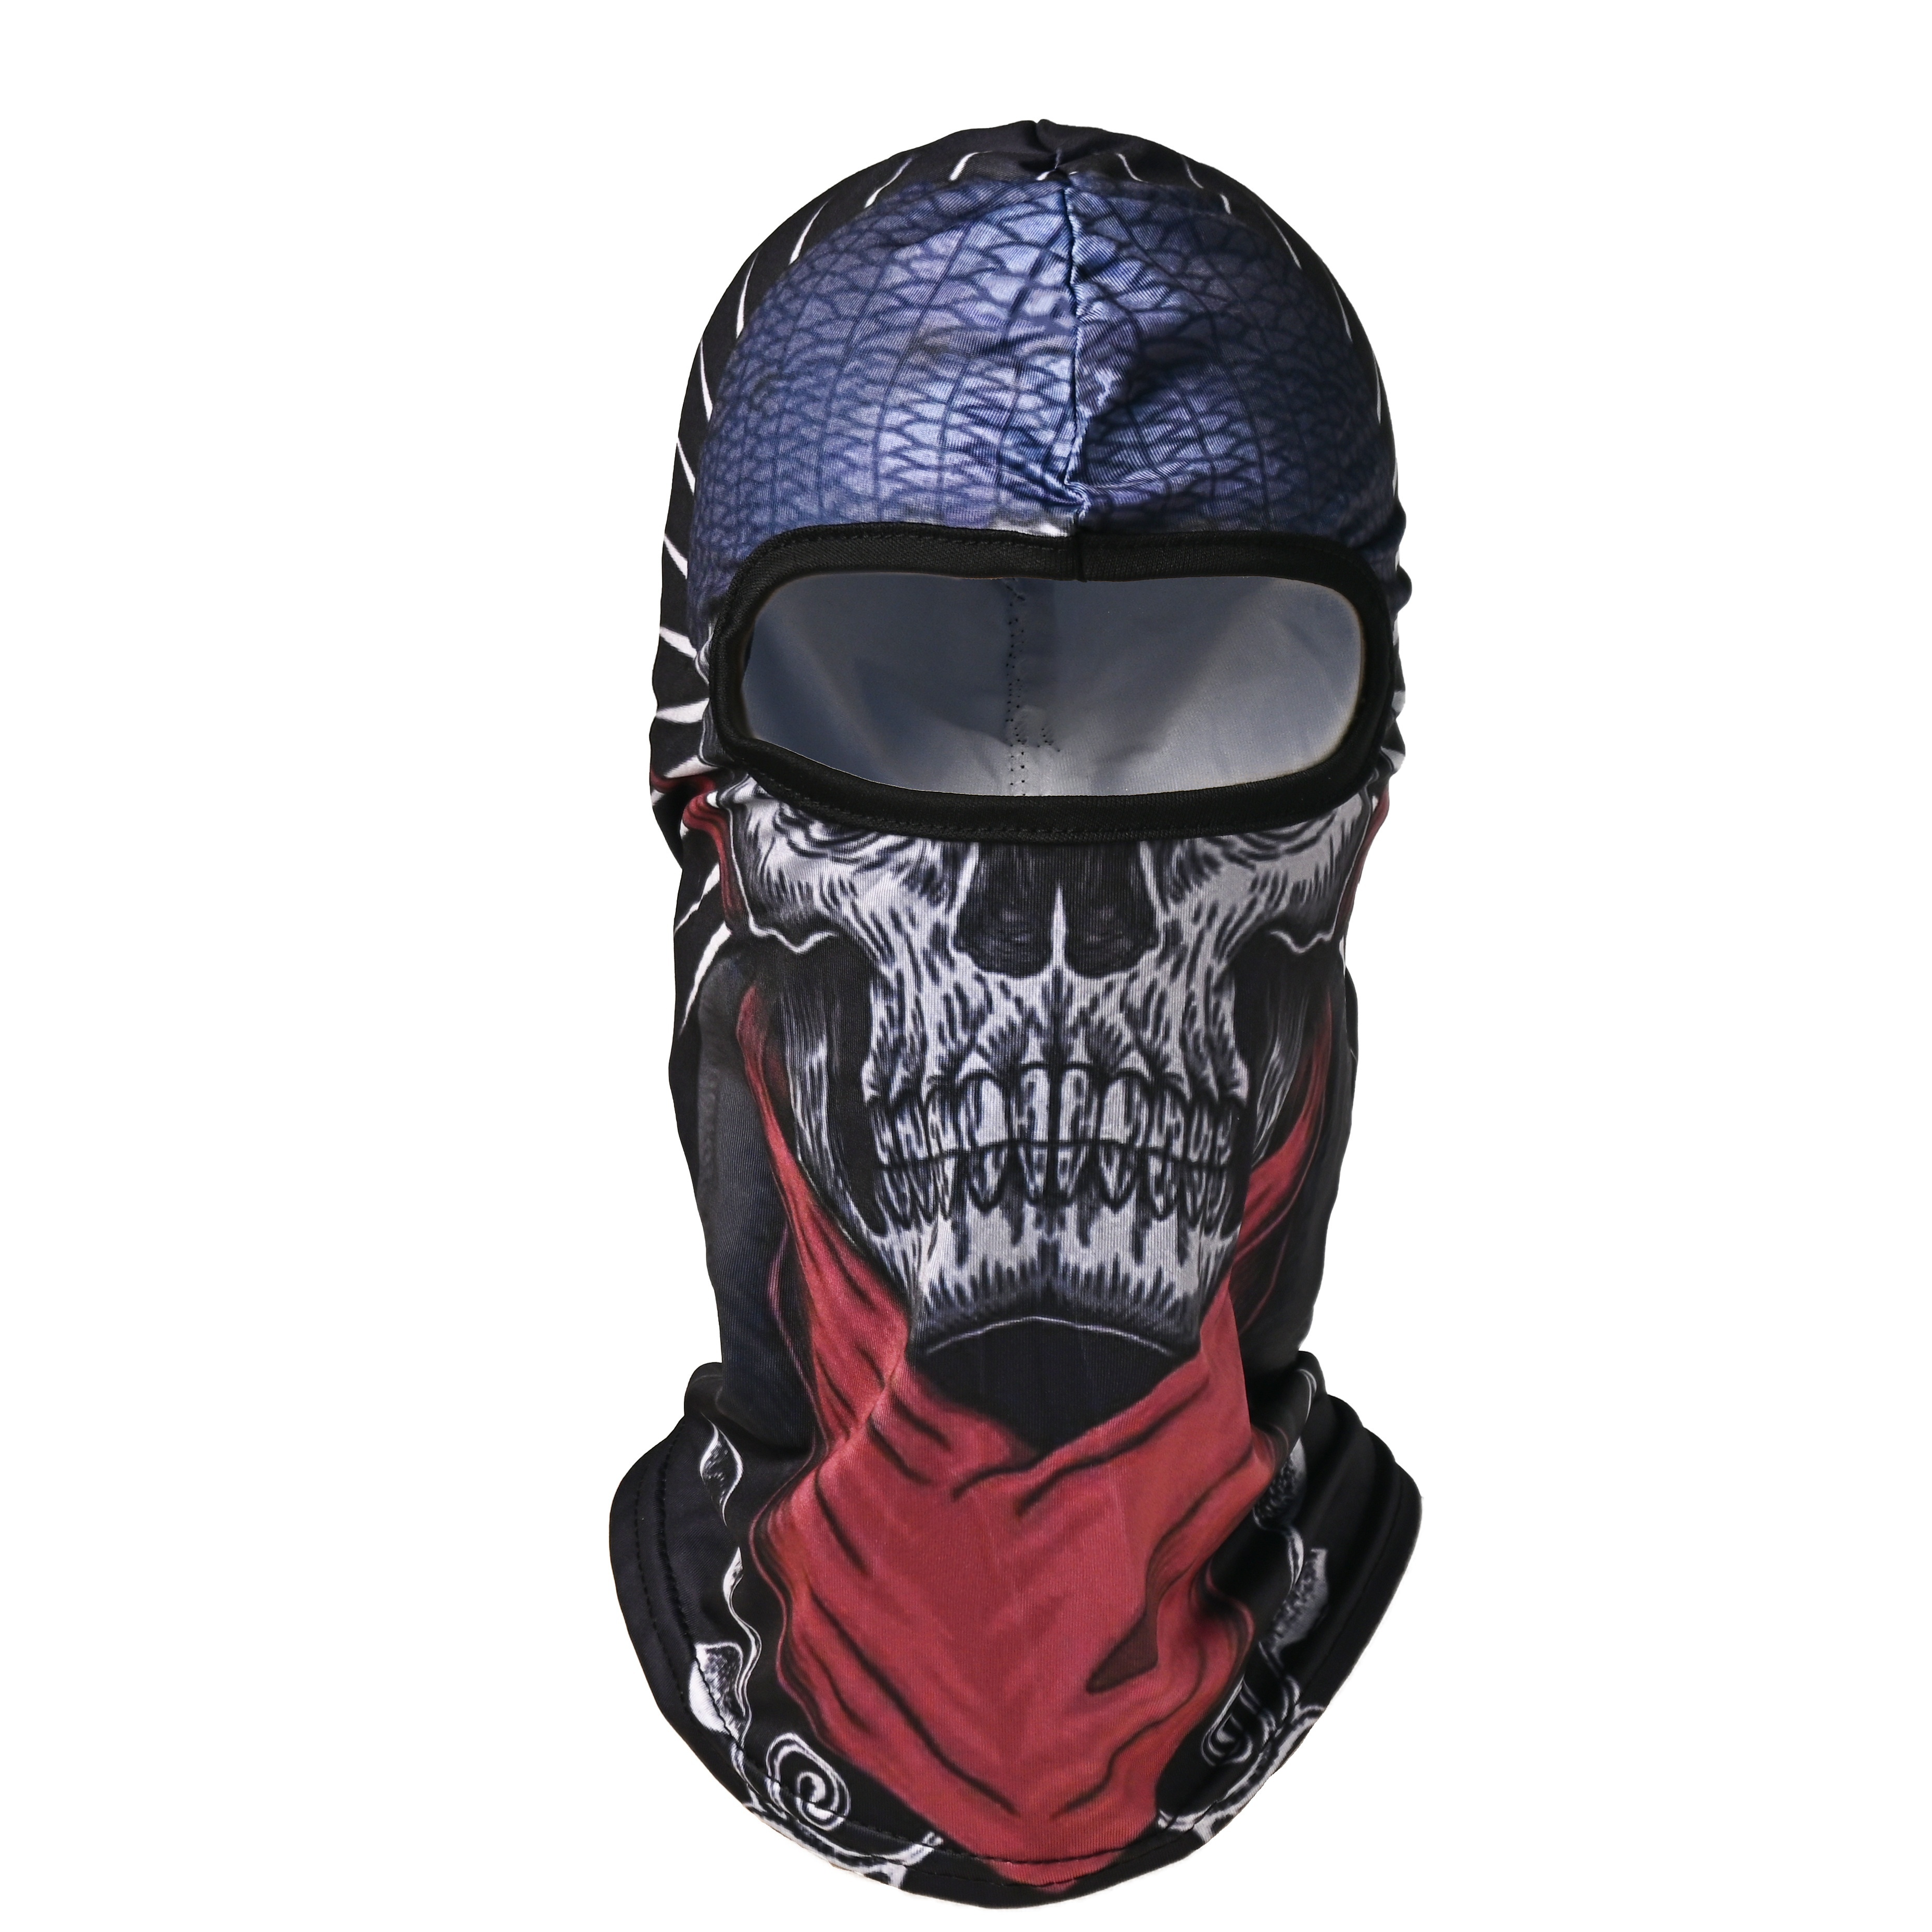 Quick Dry Black Skull Face Mask And Neck Gaiter For Cycling